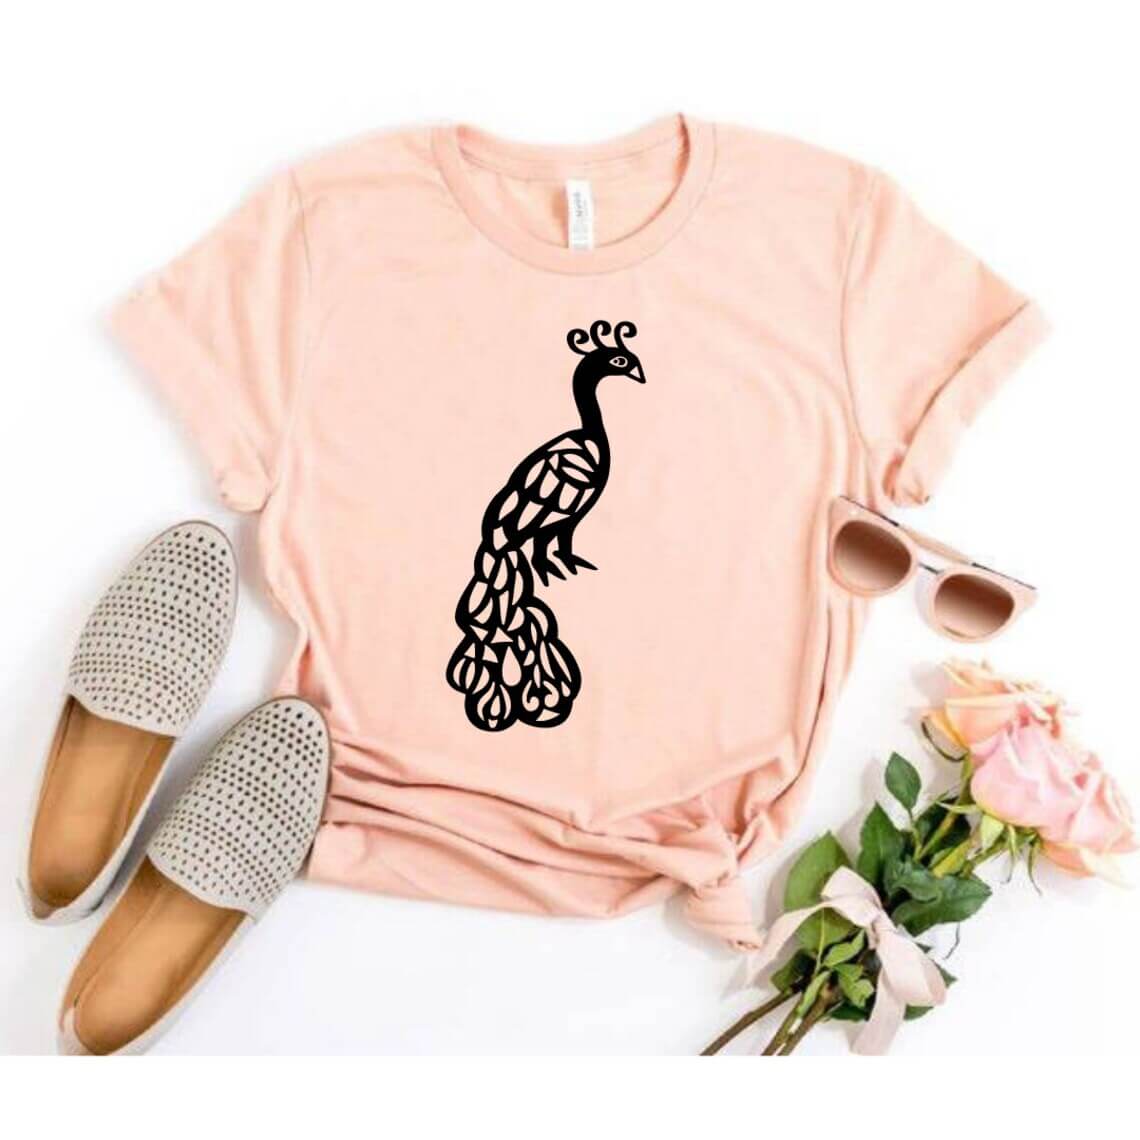 Pink shirt with a black peacock on it.